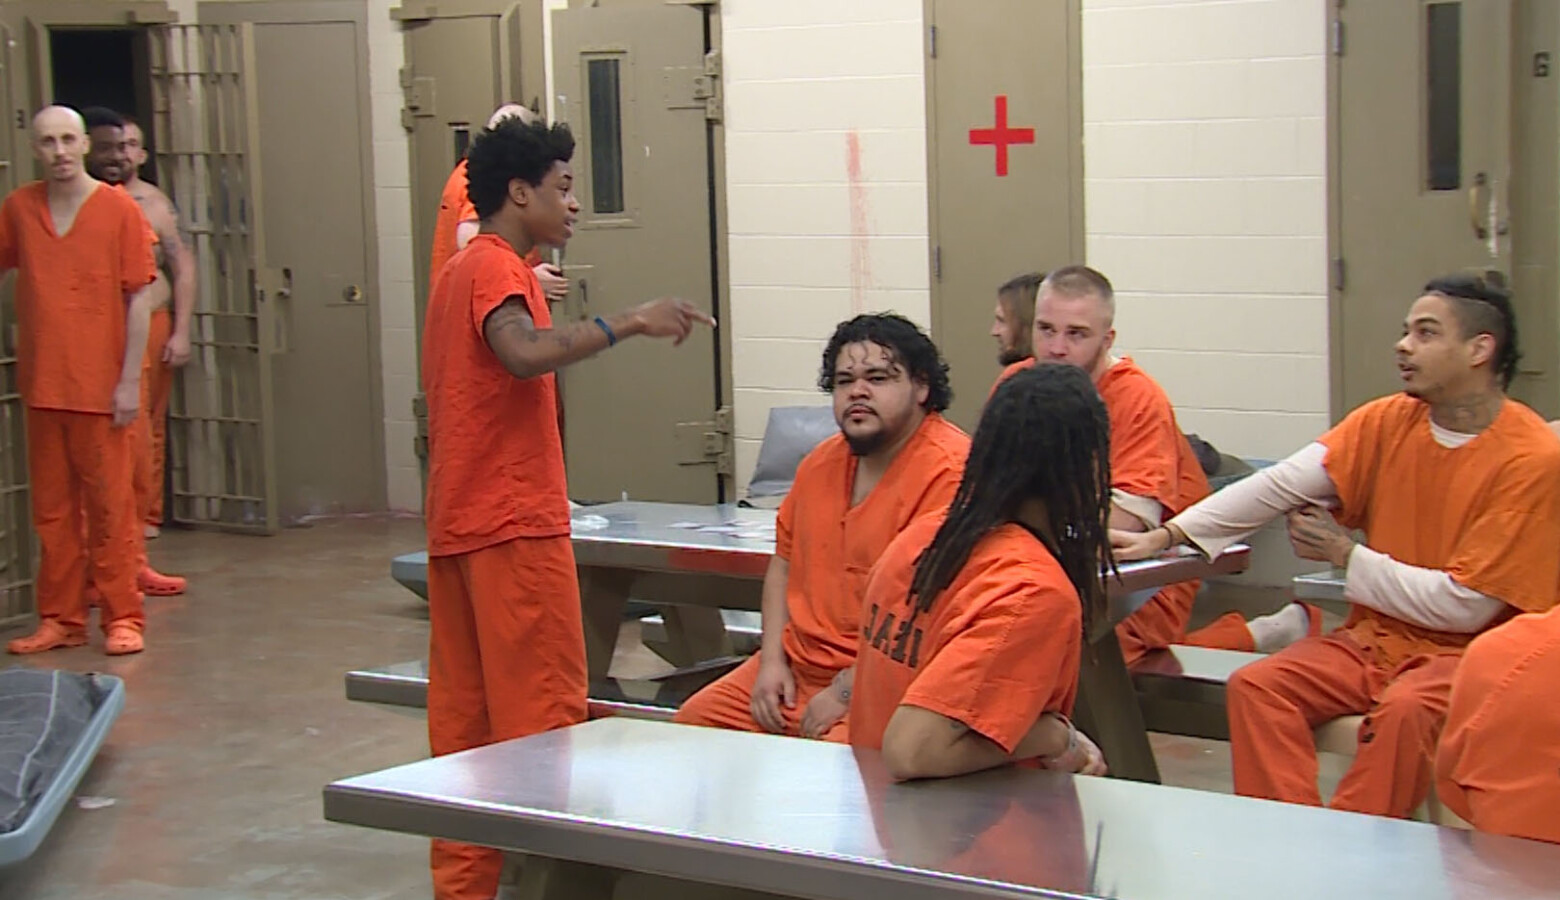 State leaders from all three branches of government say local criminal justice officials should decide how to handle inmates in county jails during the COVID-19 crisis. (FILE PHOTO: Steve Burns/WTIU)